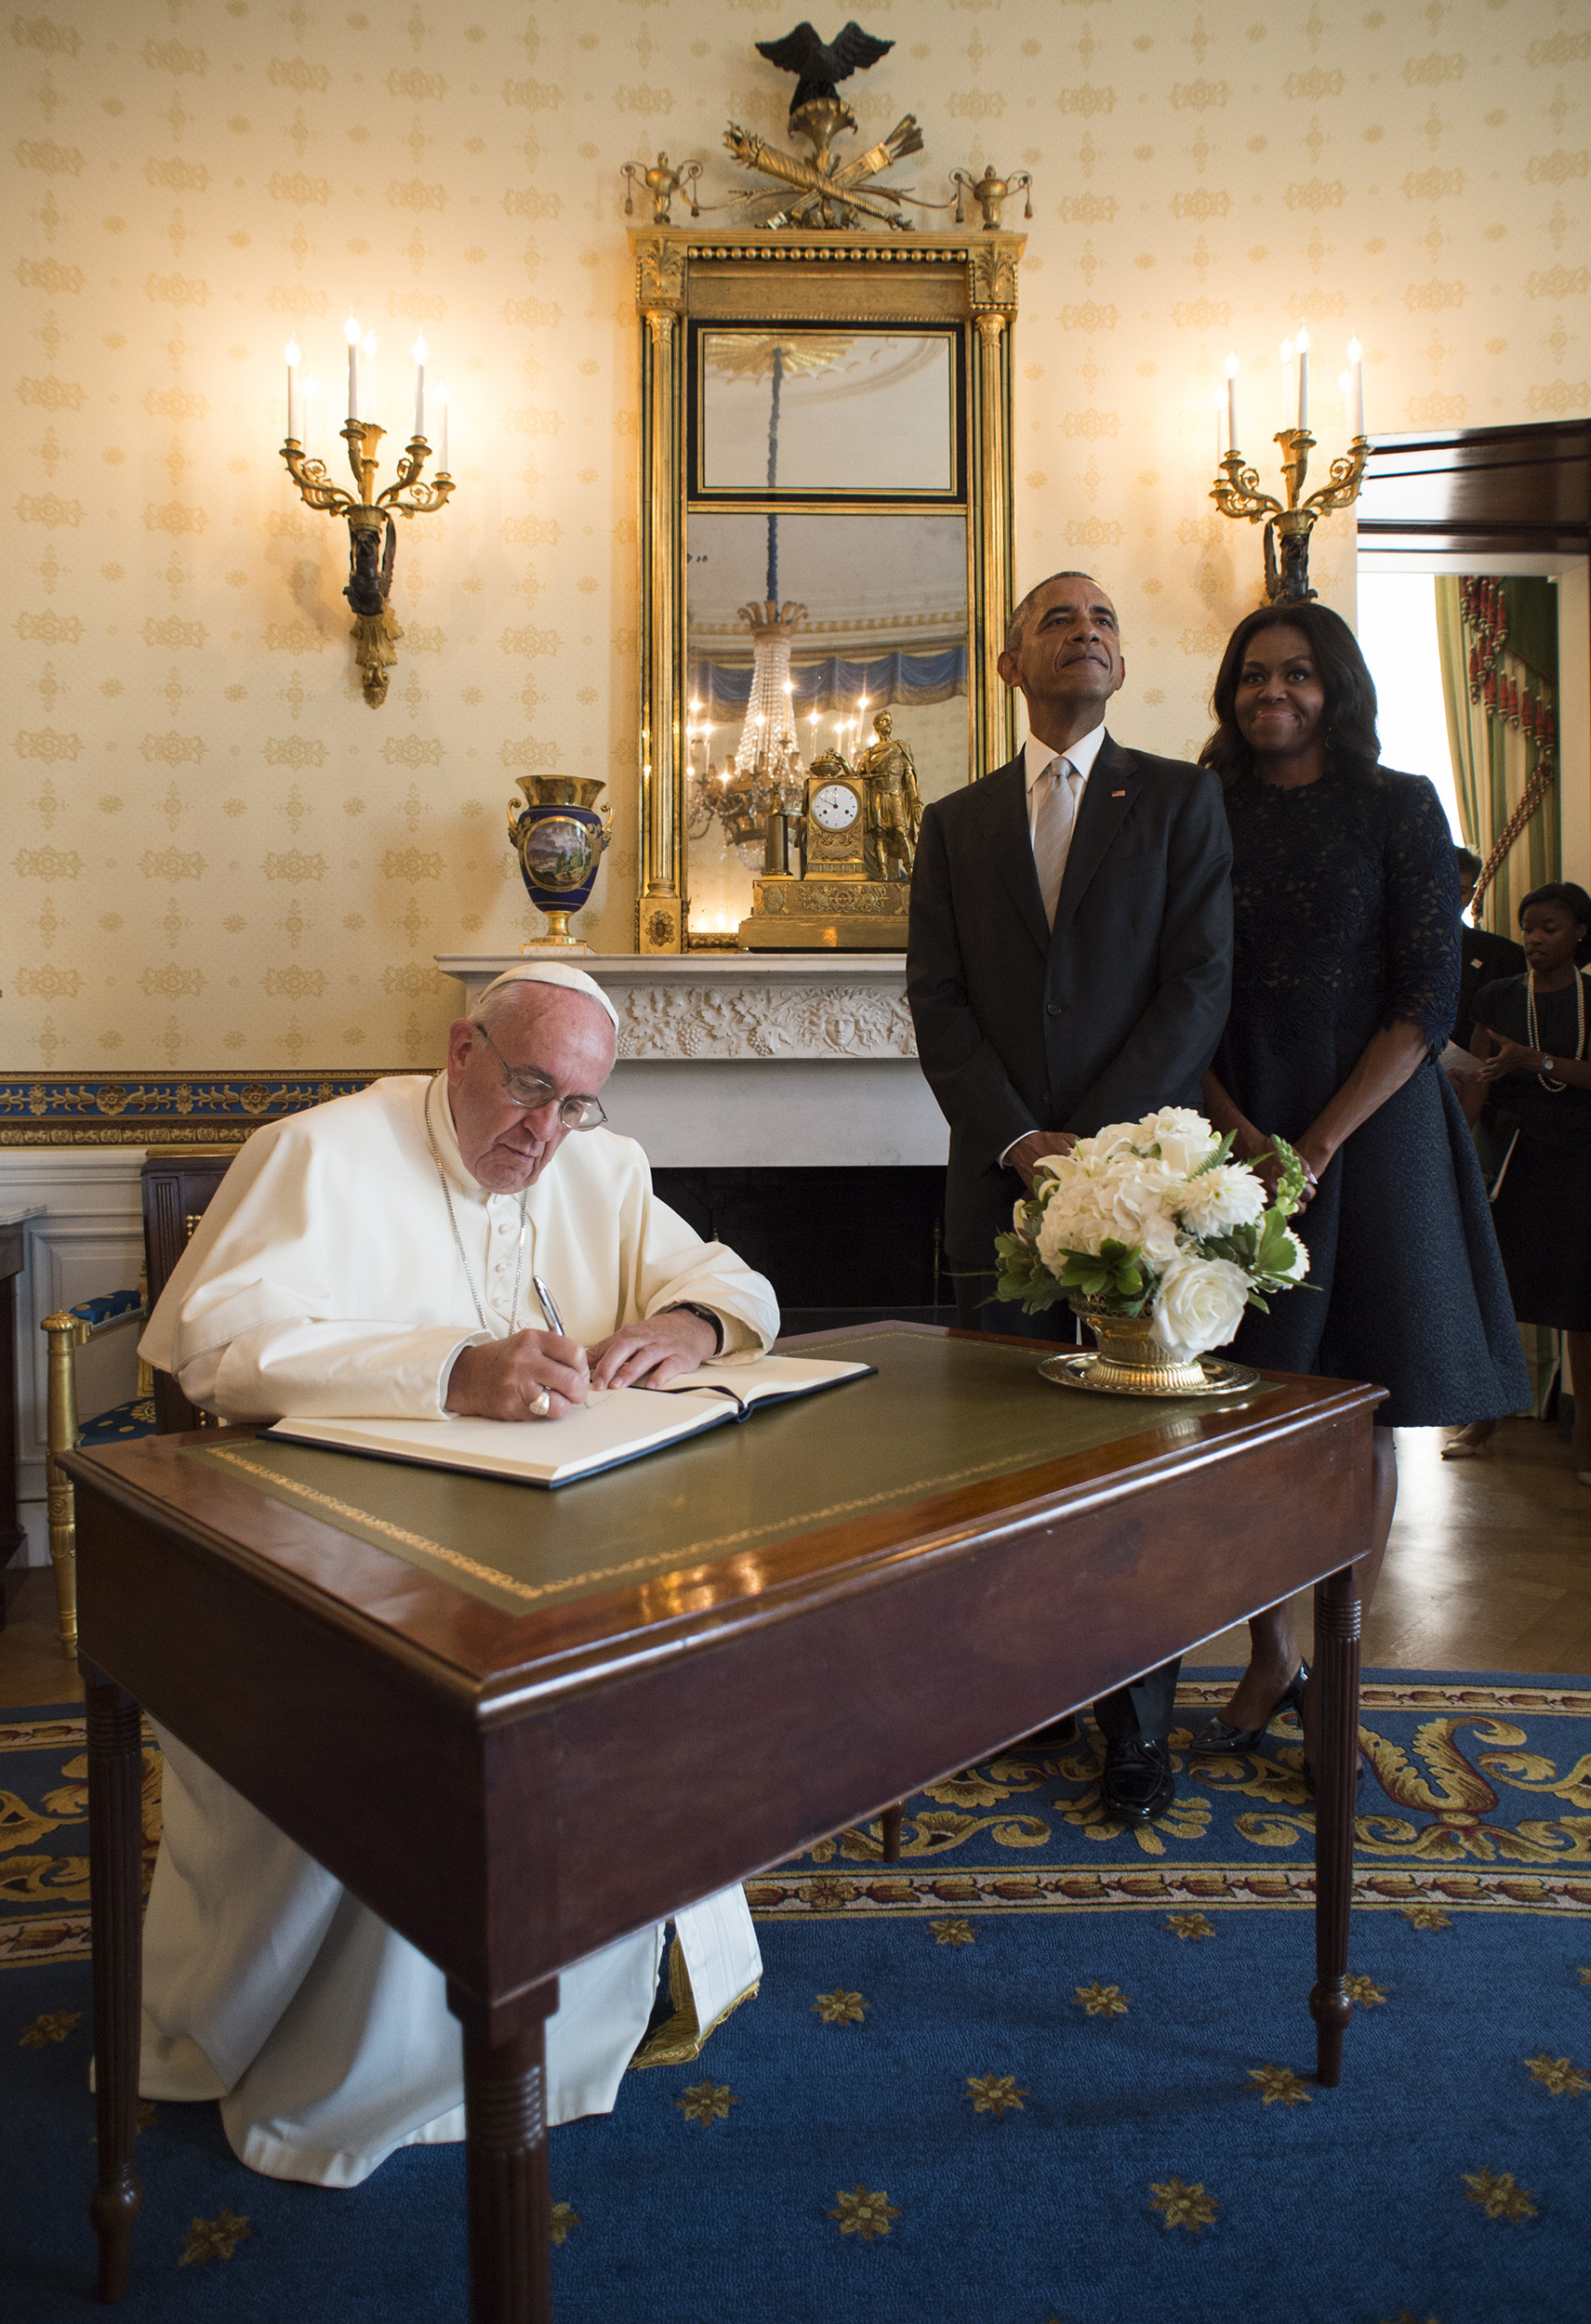 PHOTO: In this photo provided by L'Osservatore Romano, Pope Francis signs a book as first lady Michelle Obama and President Barack Obama look on at the White House in Washington, Sept. 23, 2015.